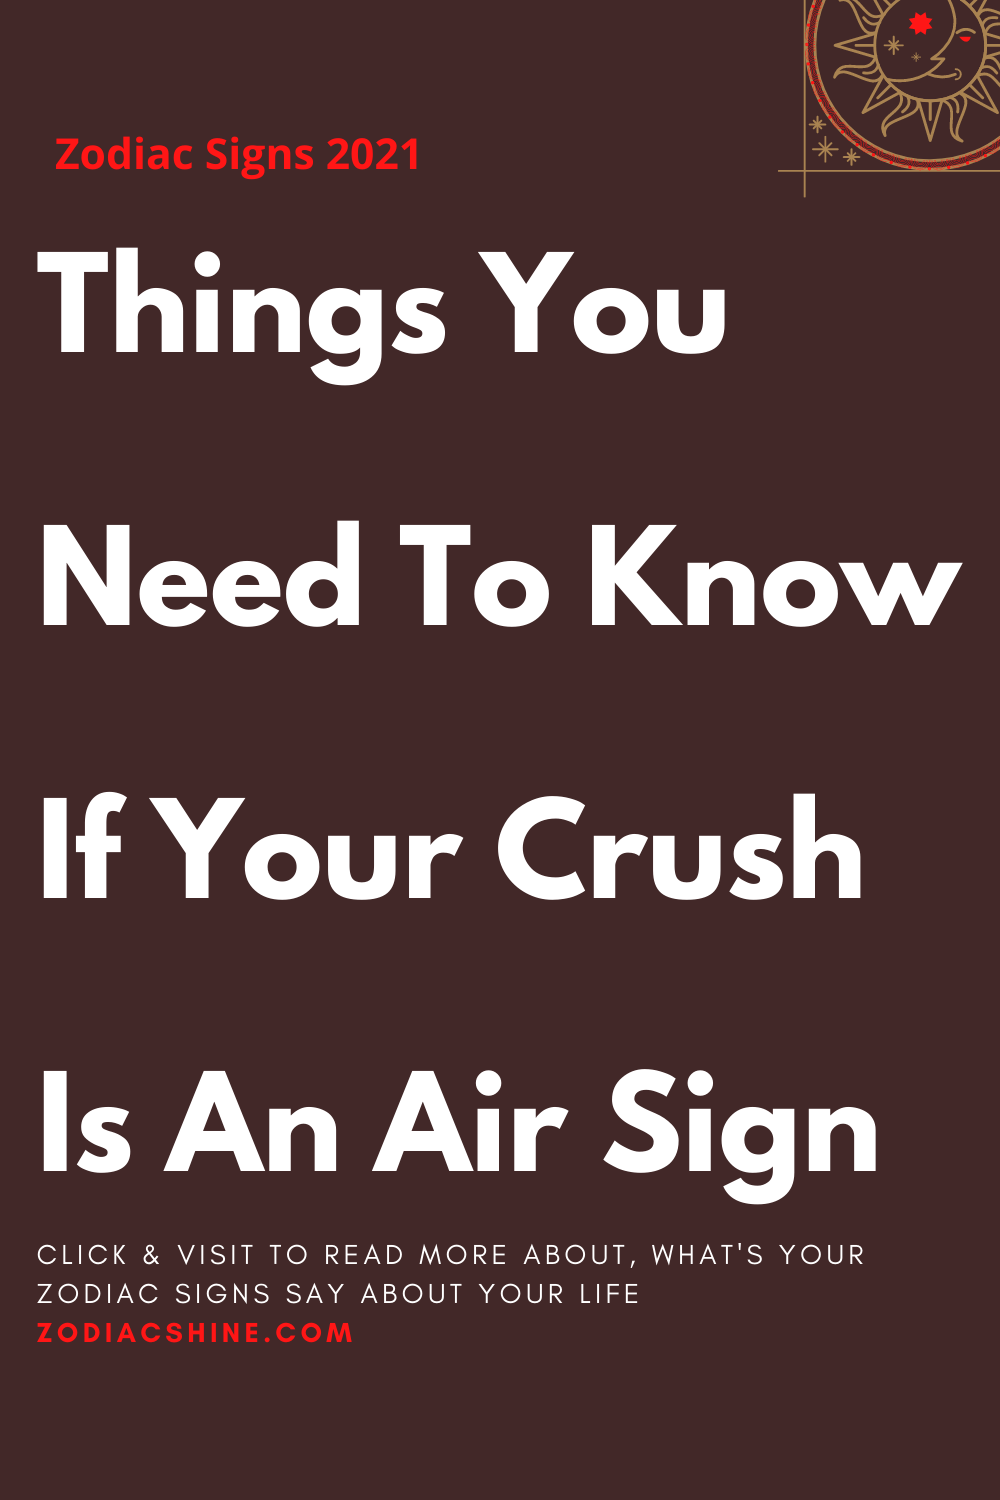 Things You Need To Know If Your Crush Is An Air Sign